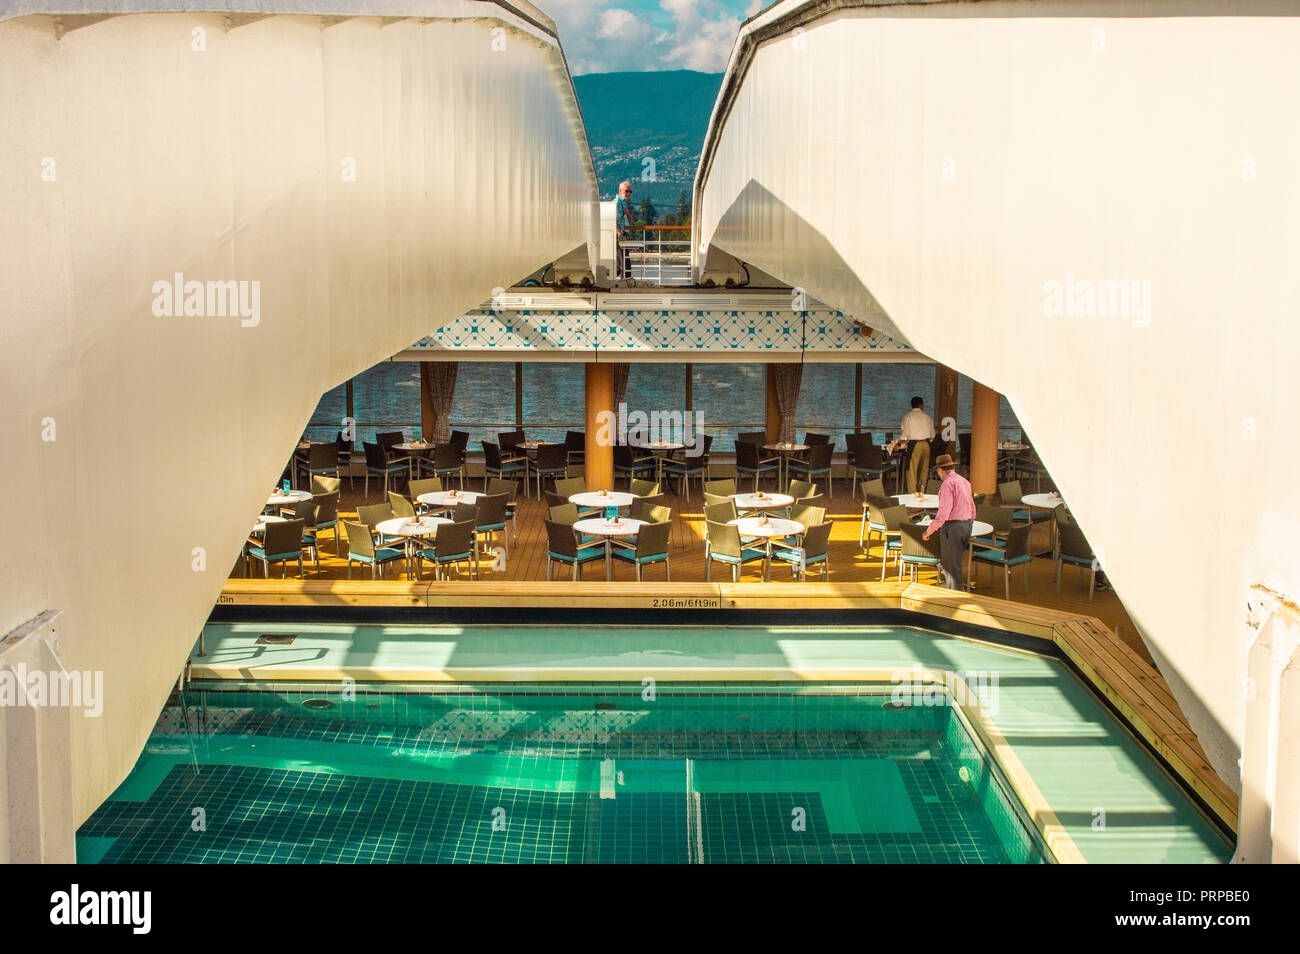 Lido Deck swimming pool under retractable roof. The Volendam, Holland